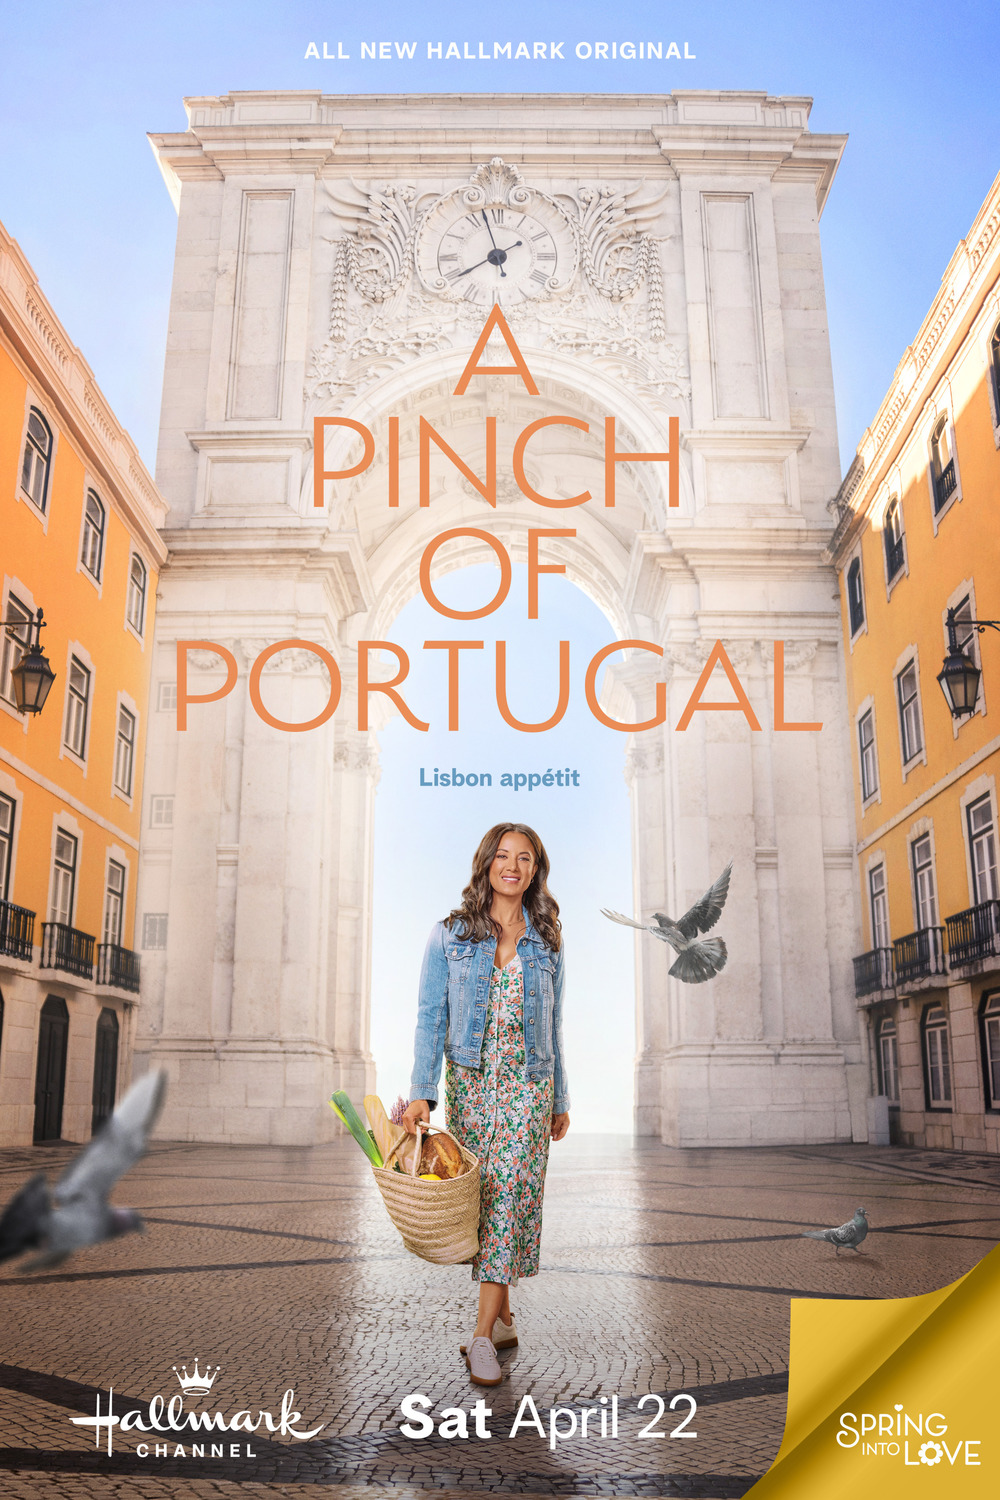 Extra Large Movie Poster Image for A Pinch of Portugal 